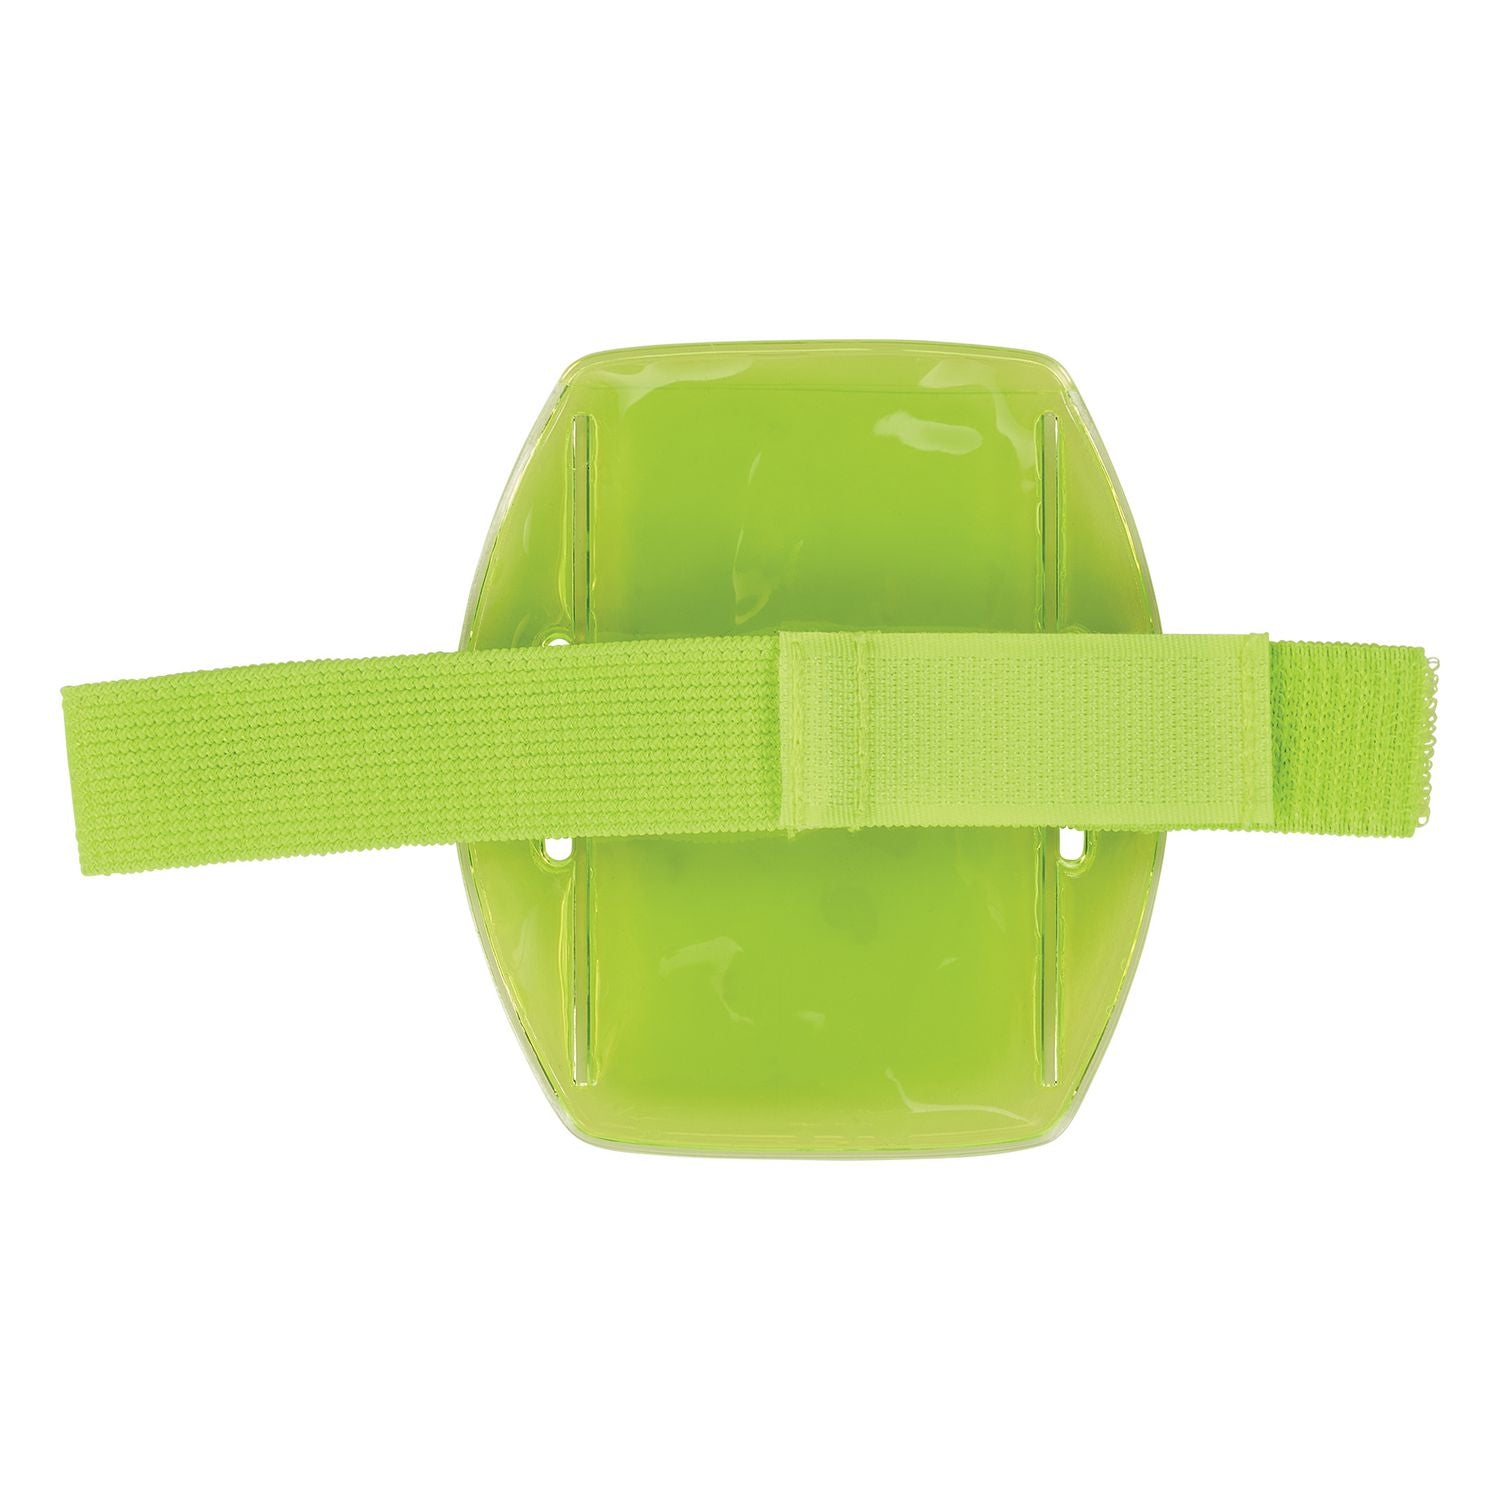 squids-3386-arm-band-id-badge-holder-vertical-lime-375-x-425-holder-25-x-4-insert-10-pack-ships-in-1-3-business-days_ego19970 - 2